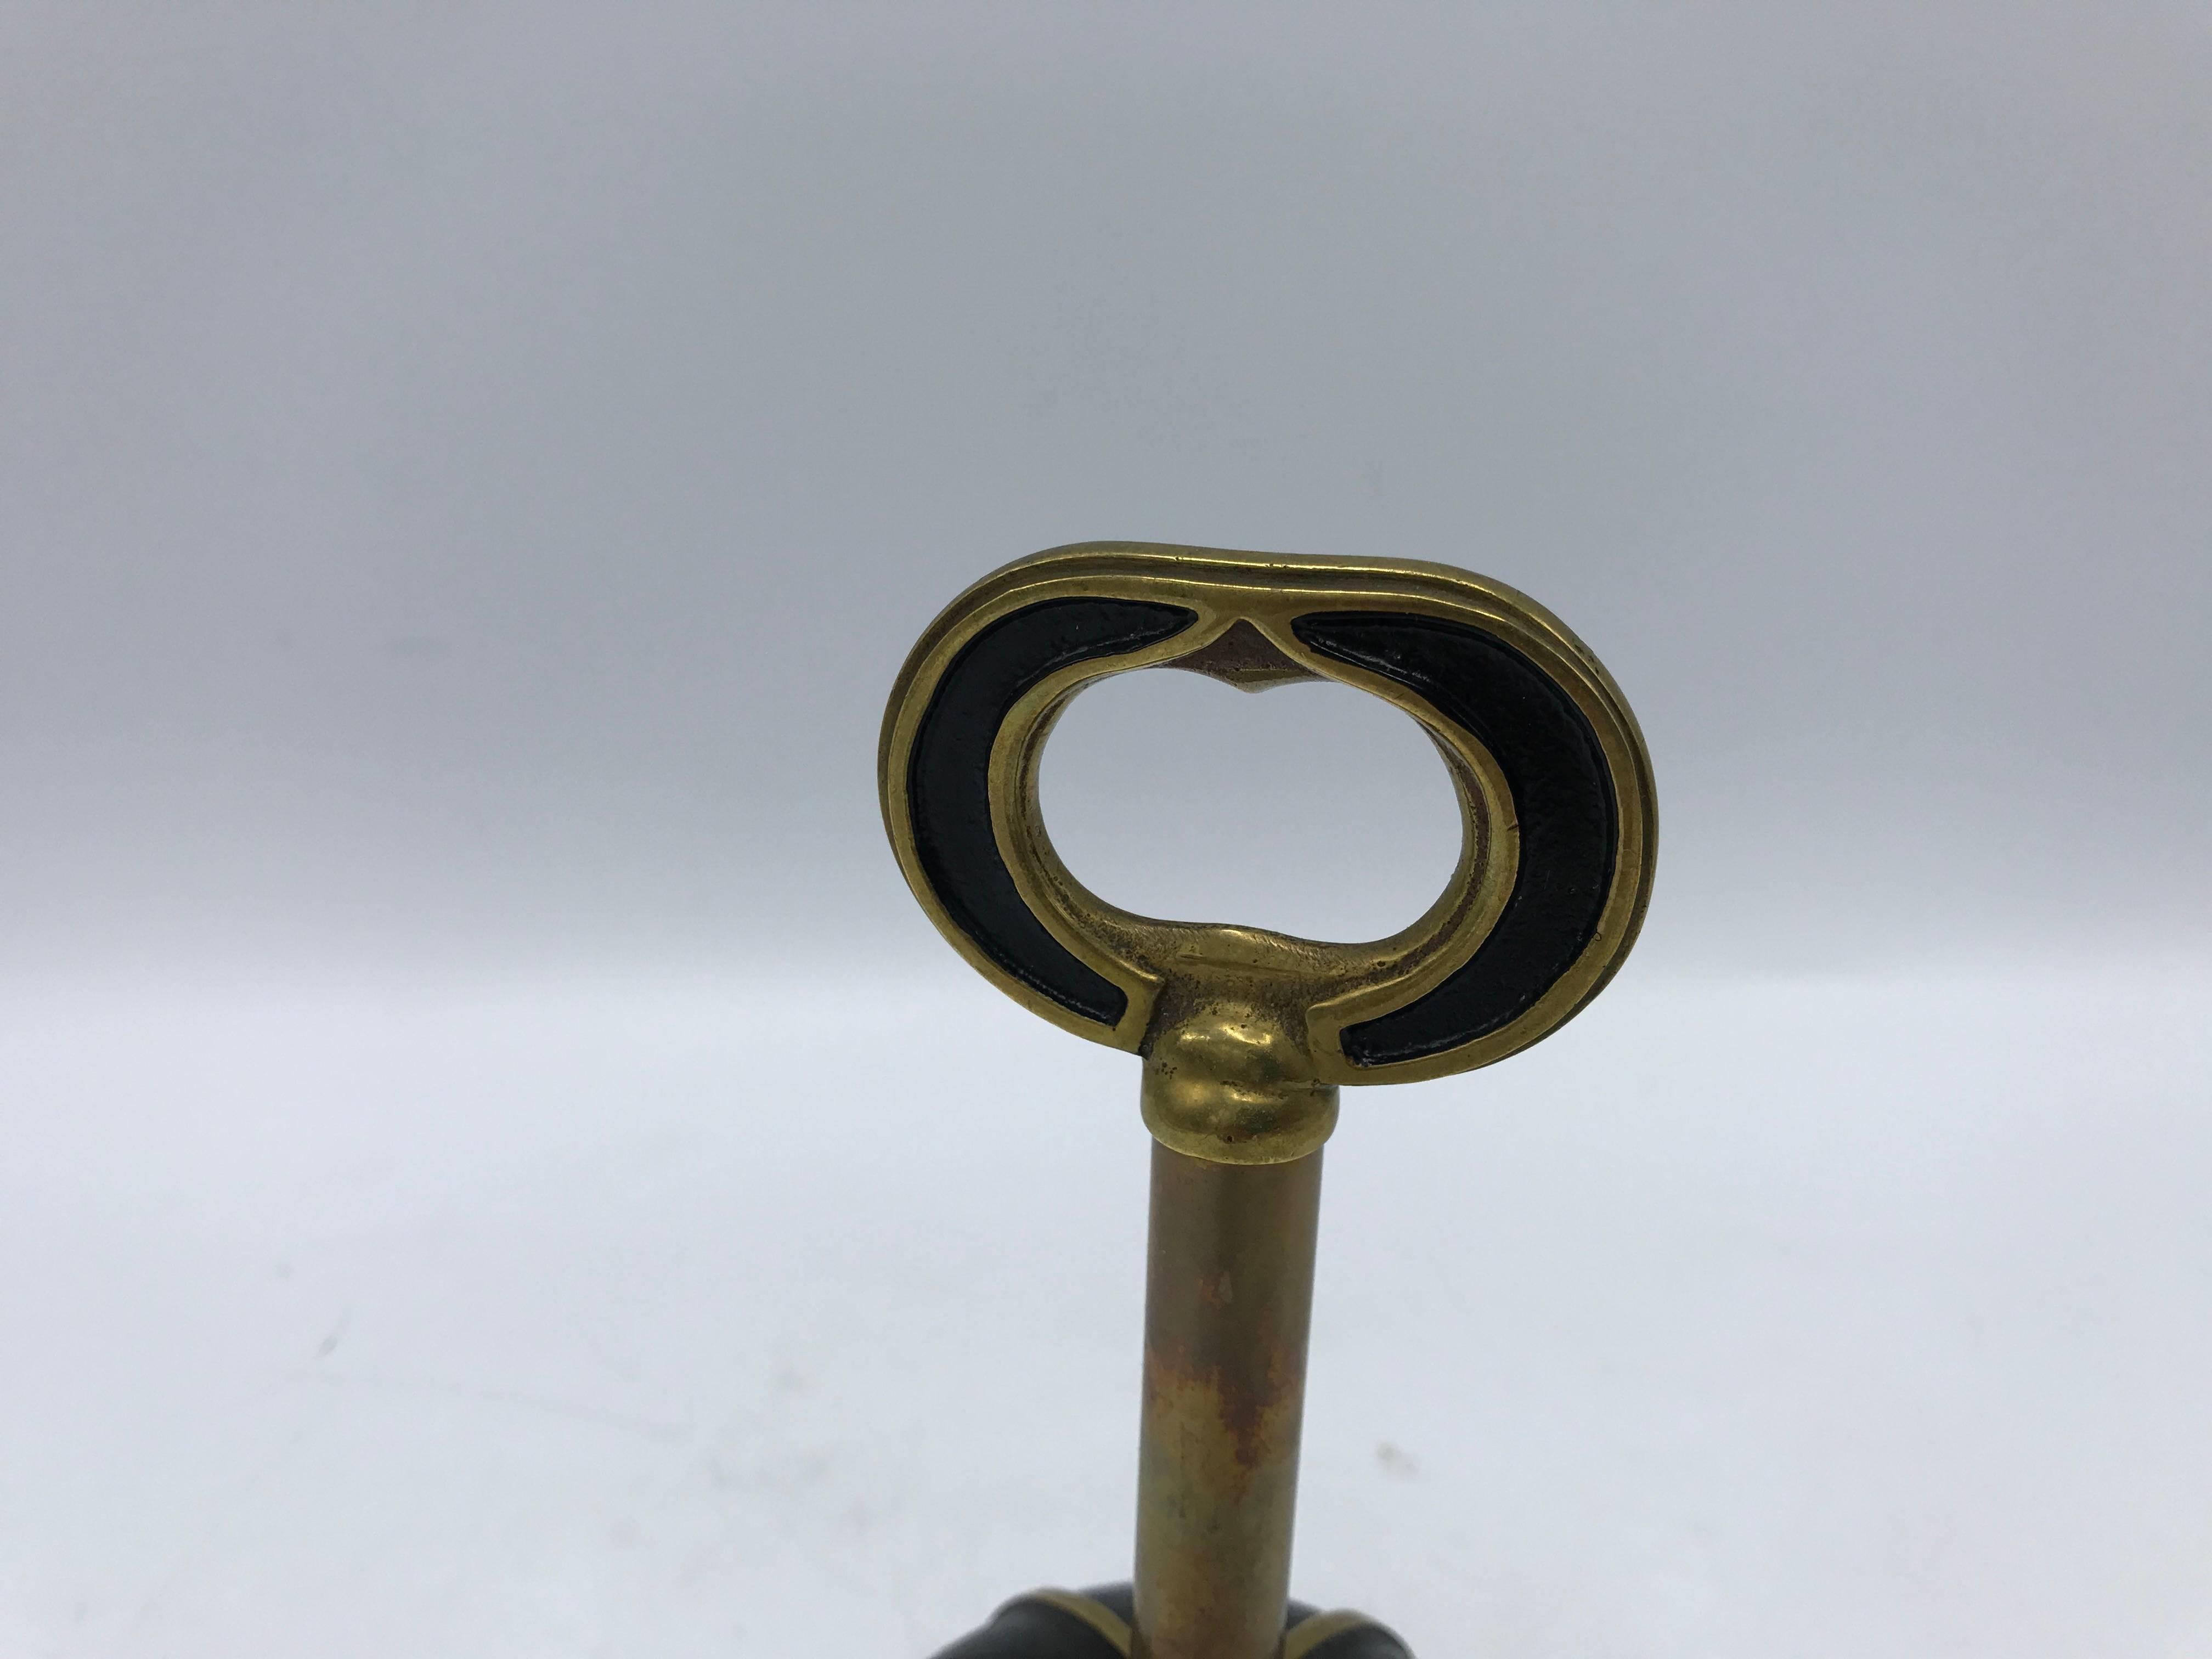 Offered is a stunning, 1950s brass/bronze wine corkscrew, bottle opener, and bell. Marked: Austria.